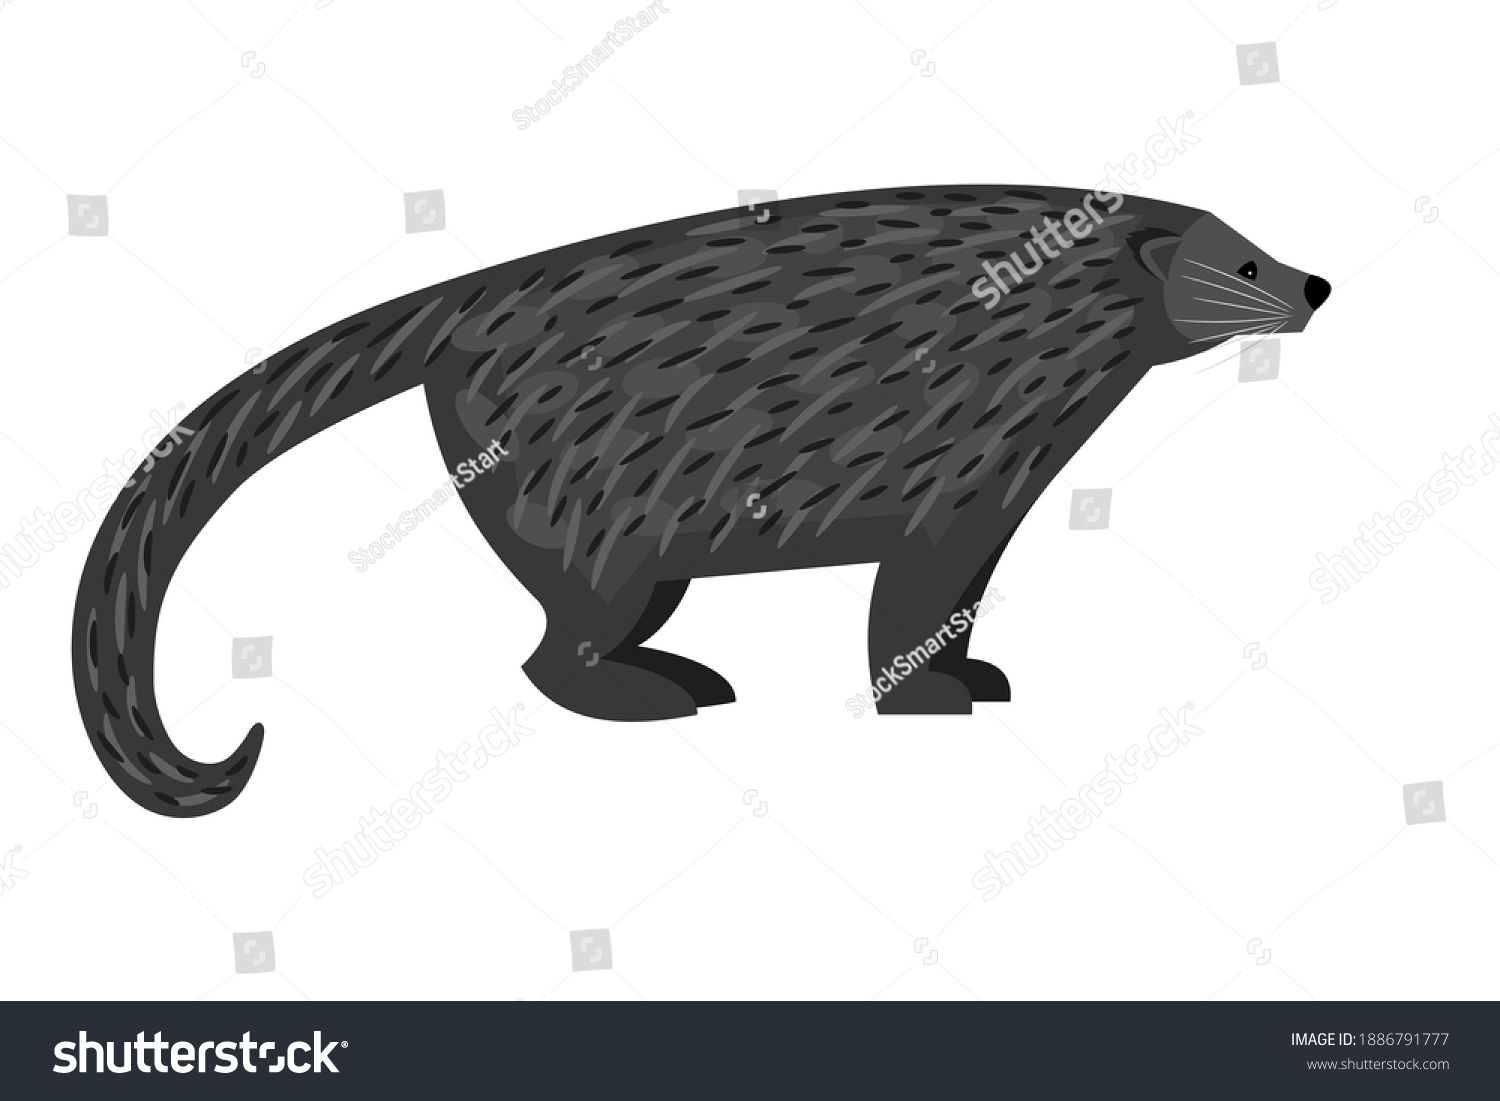 SVG of Tropical predator. Cartoon binturong, wild nature character, vector illustration asian pet of wildlife isolated on white background svg